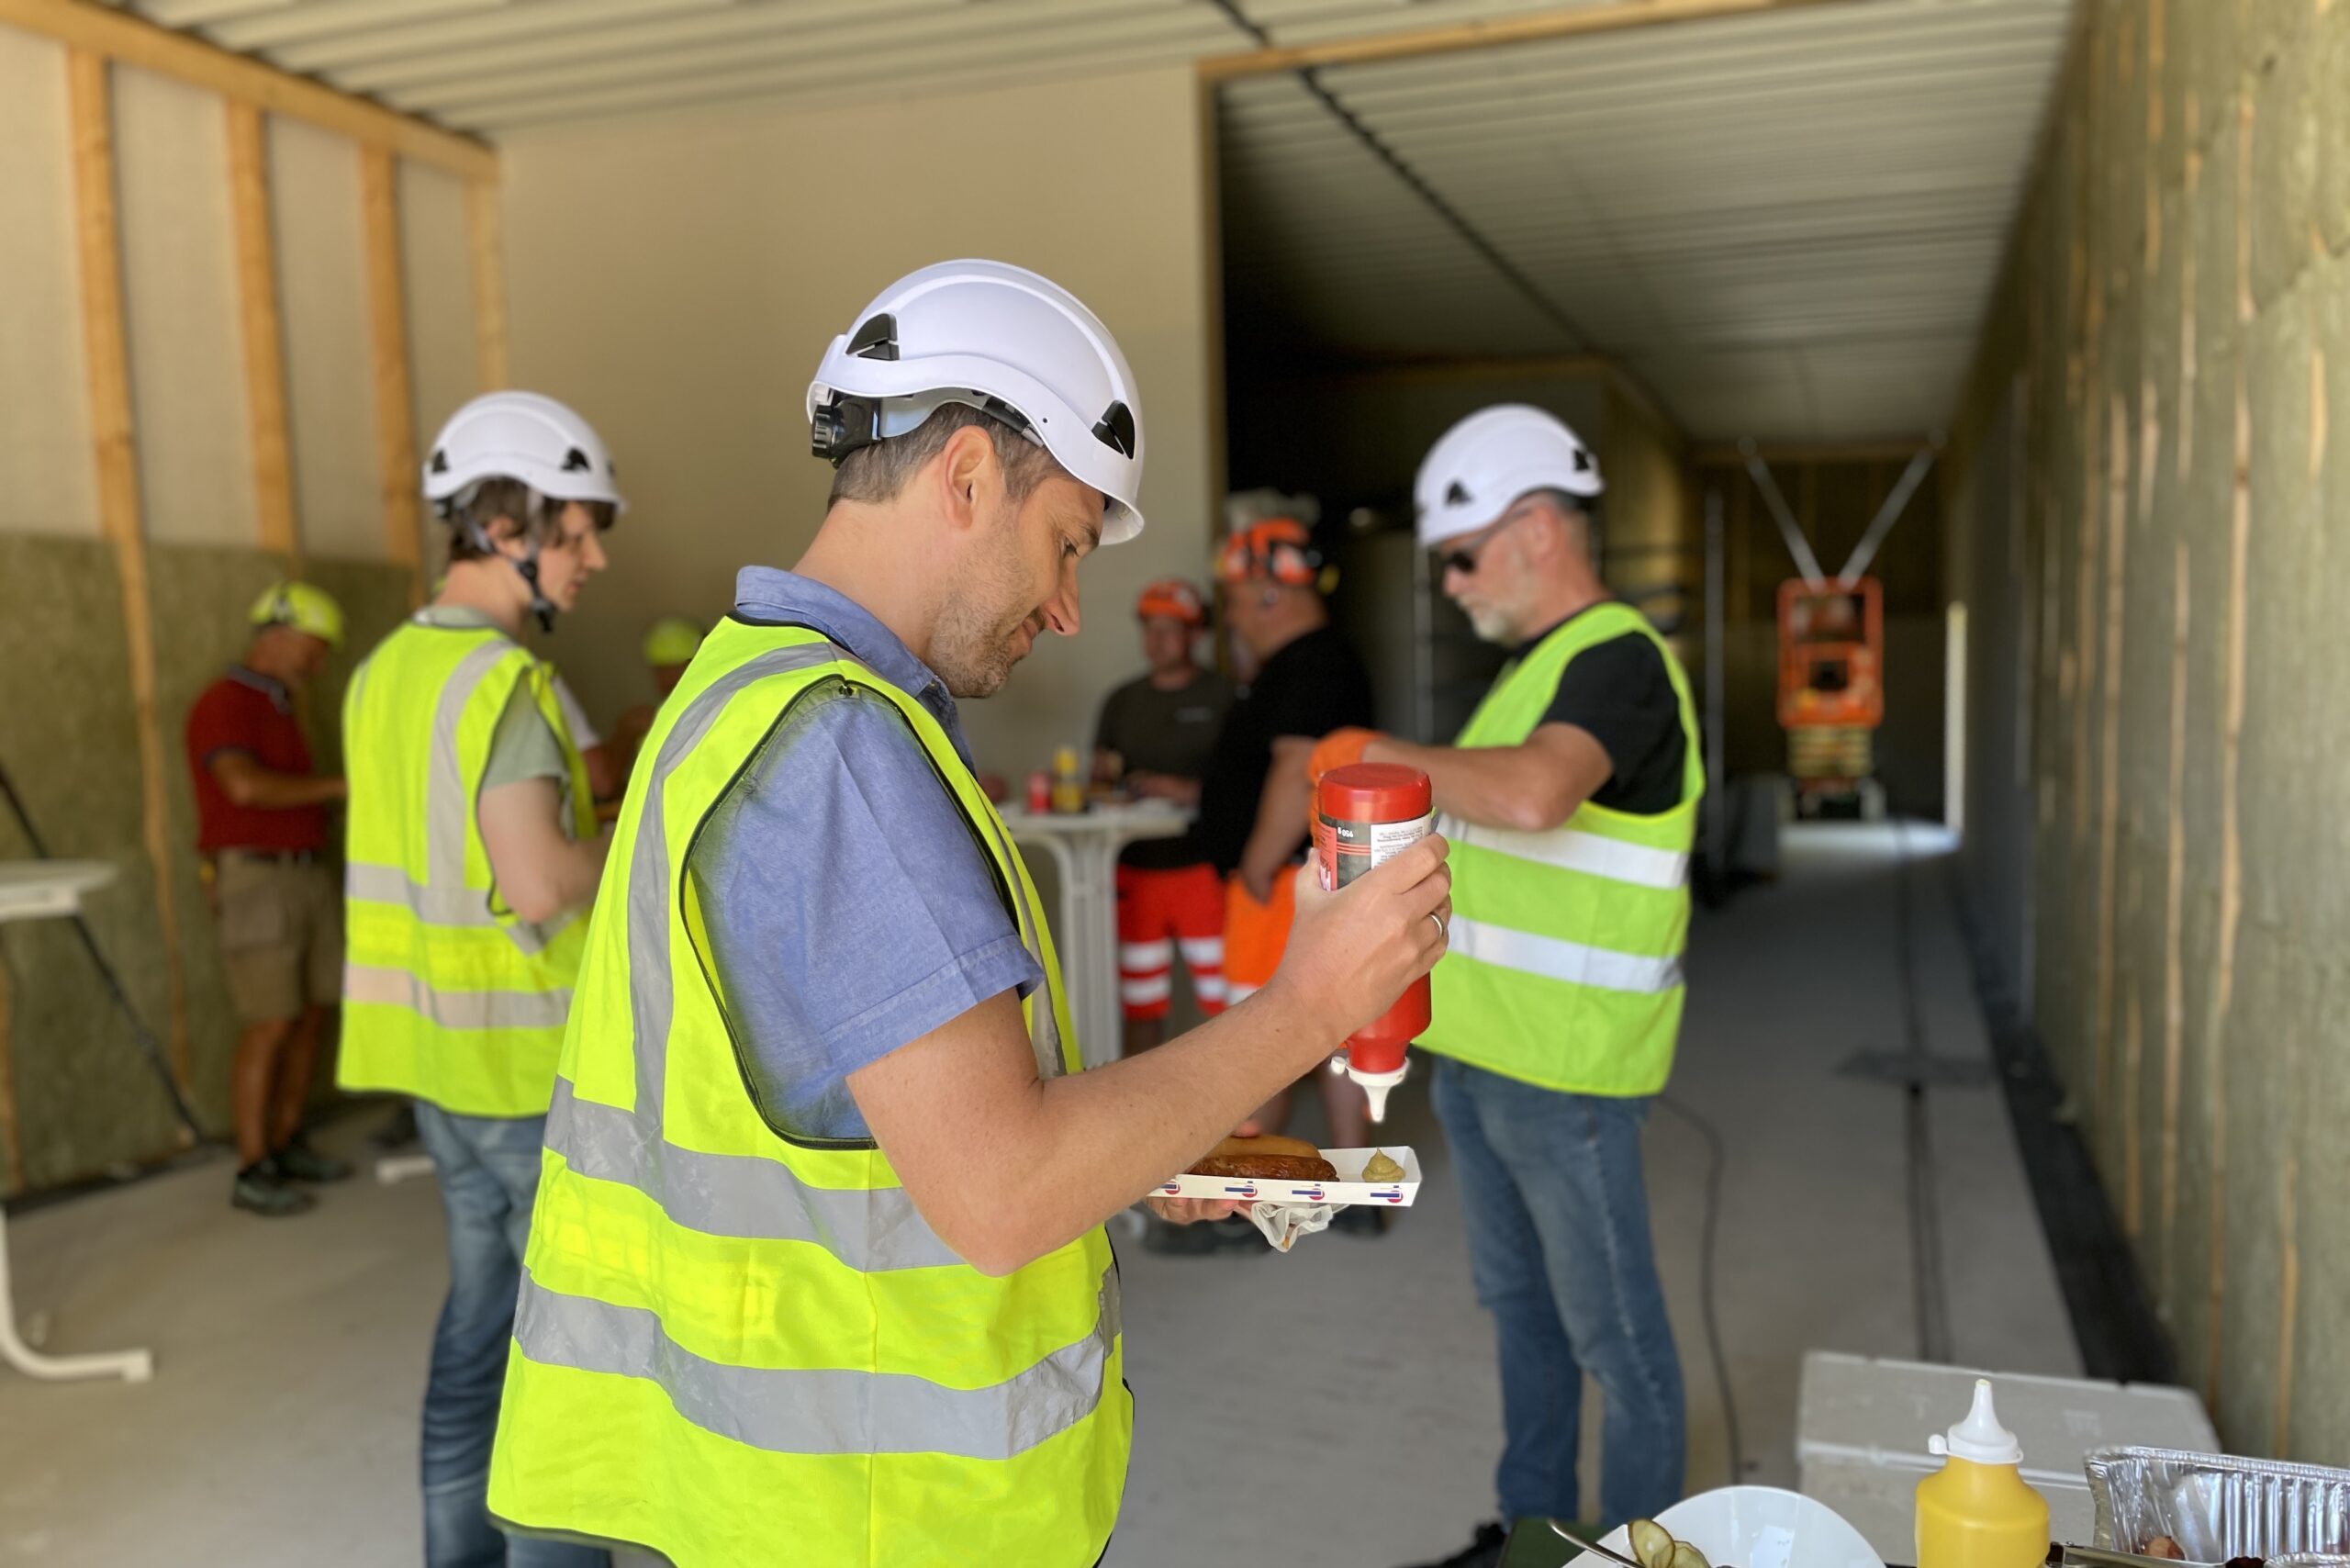 Hotdogs and Cocio at topping out ceremony